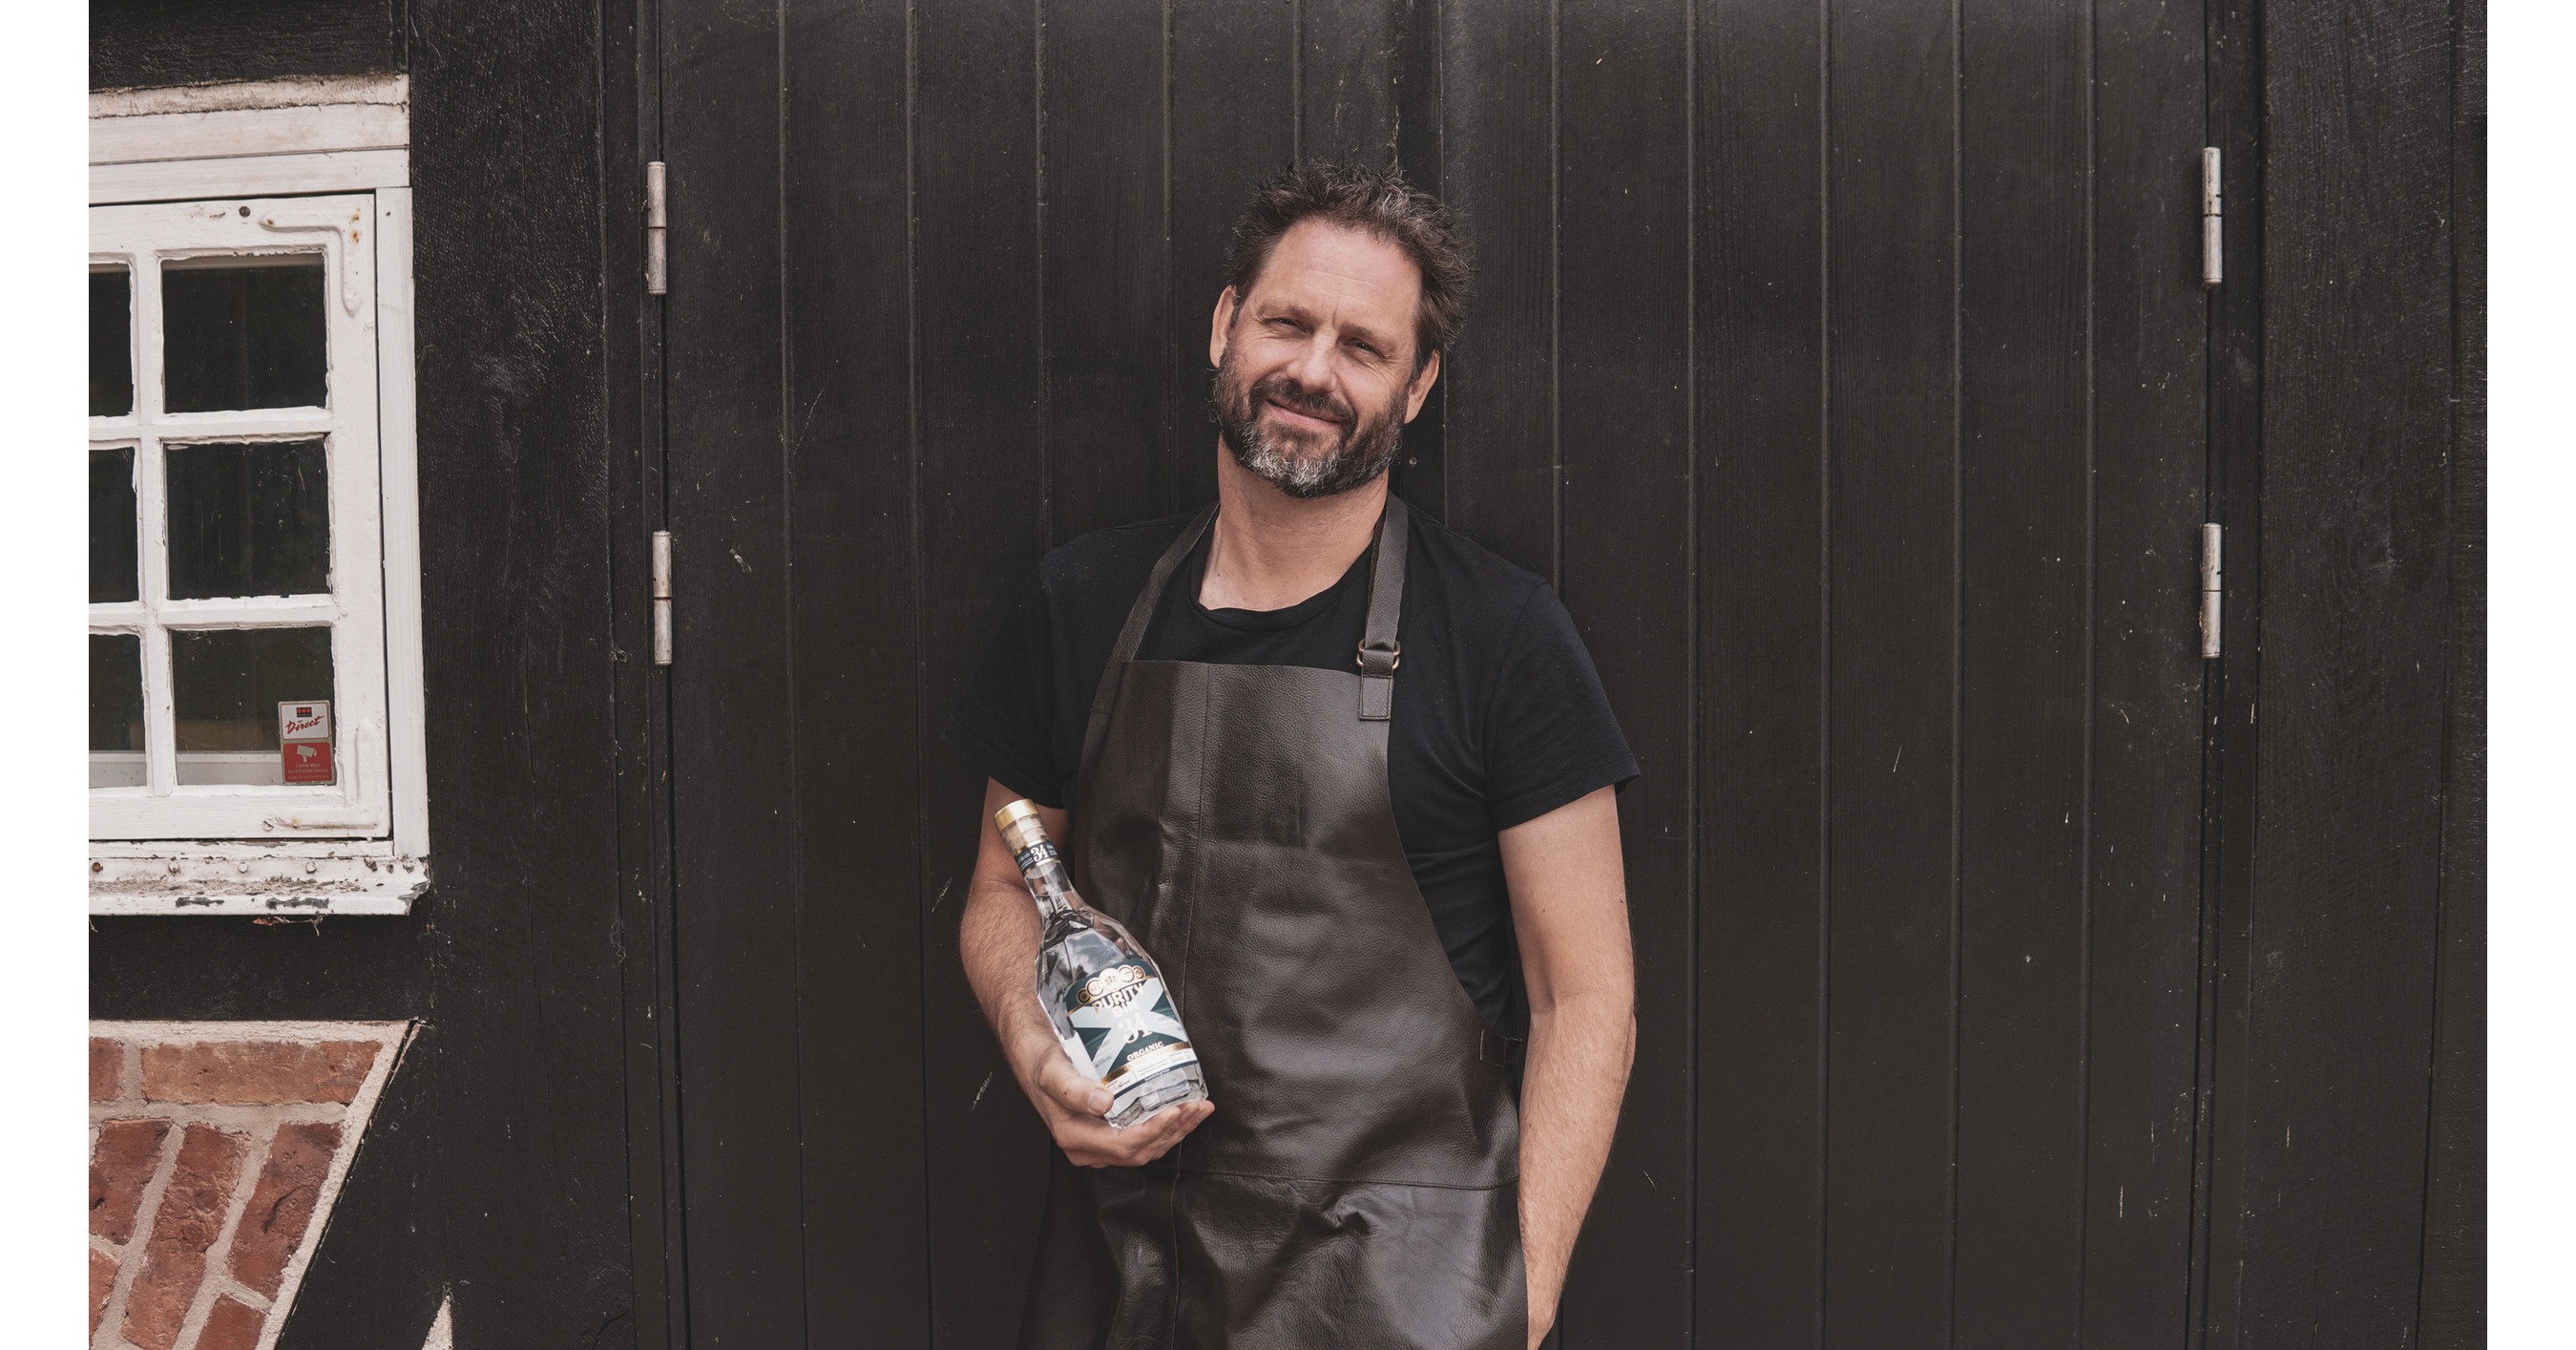 Chef in Town: Belvedere Vodka, the luxury vodka for tastings and